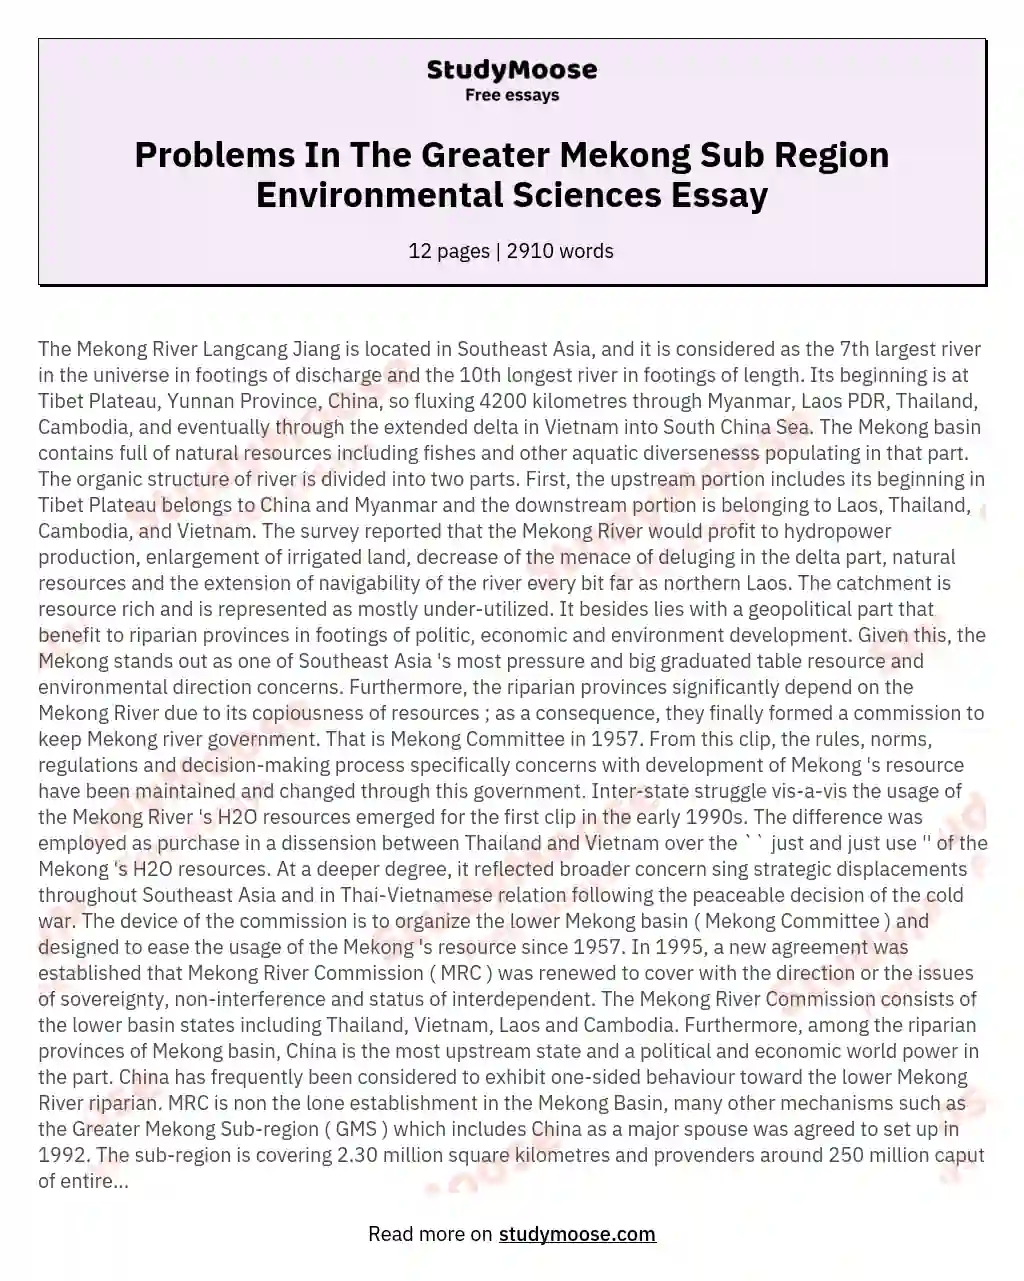 Problems In The Greater Mekong Sub Region Environmental Sciences Essay essay